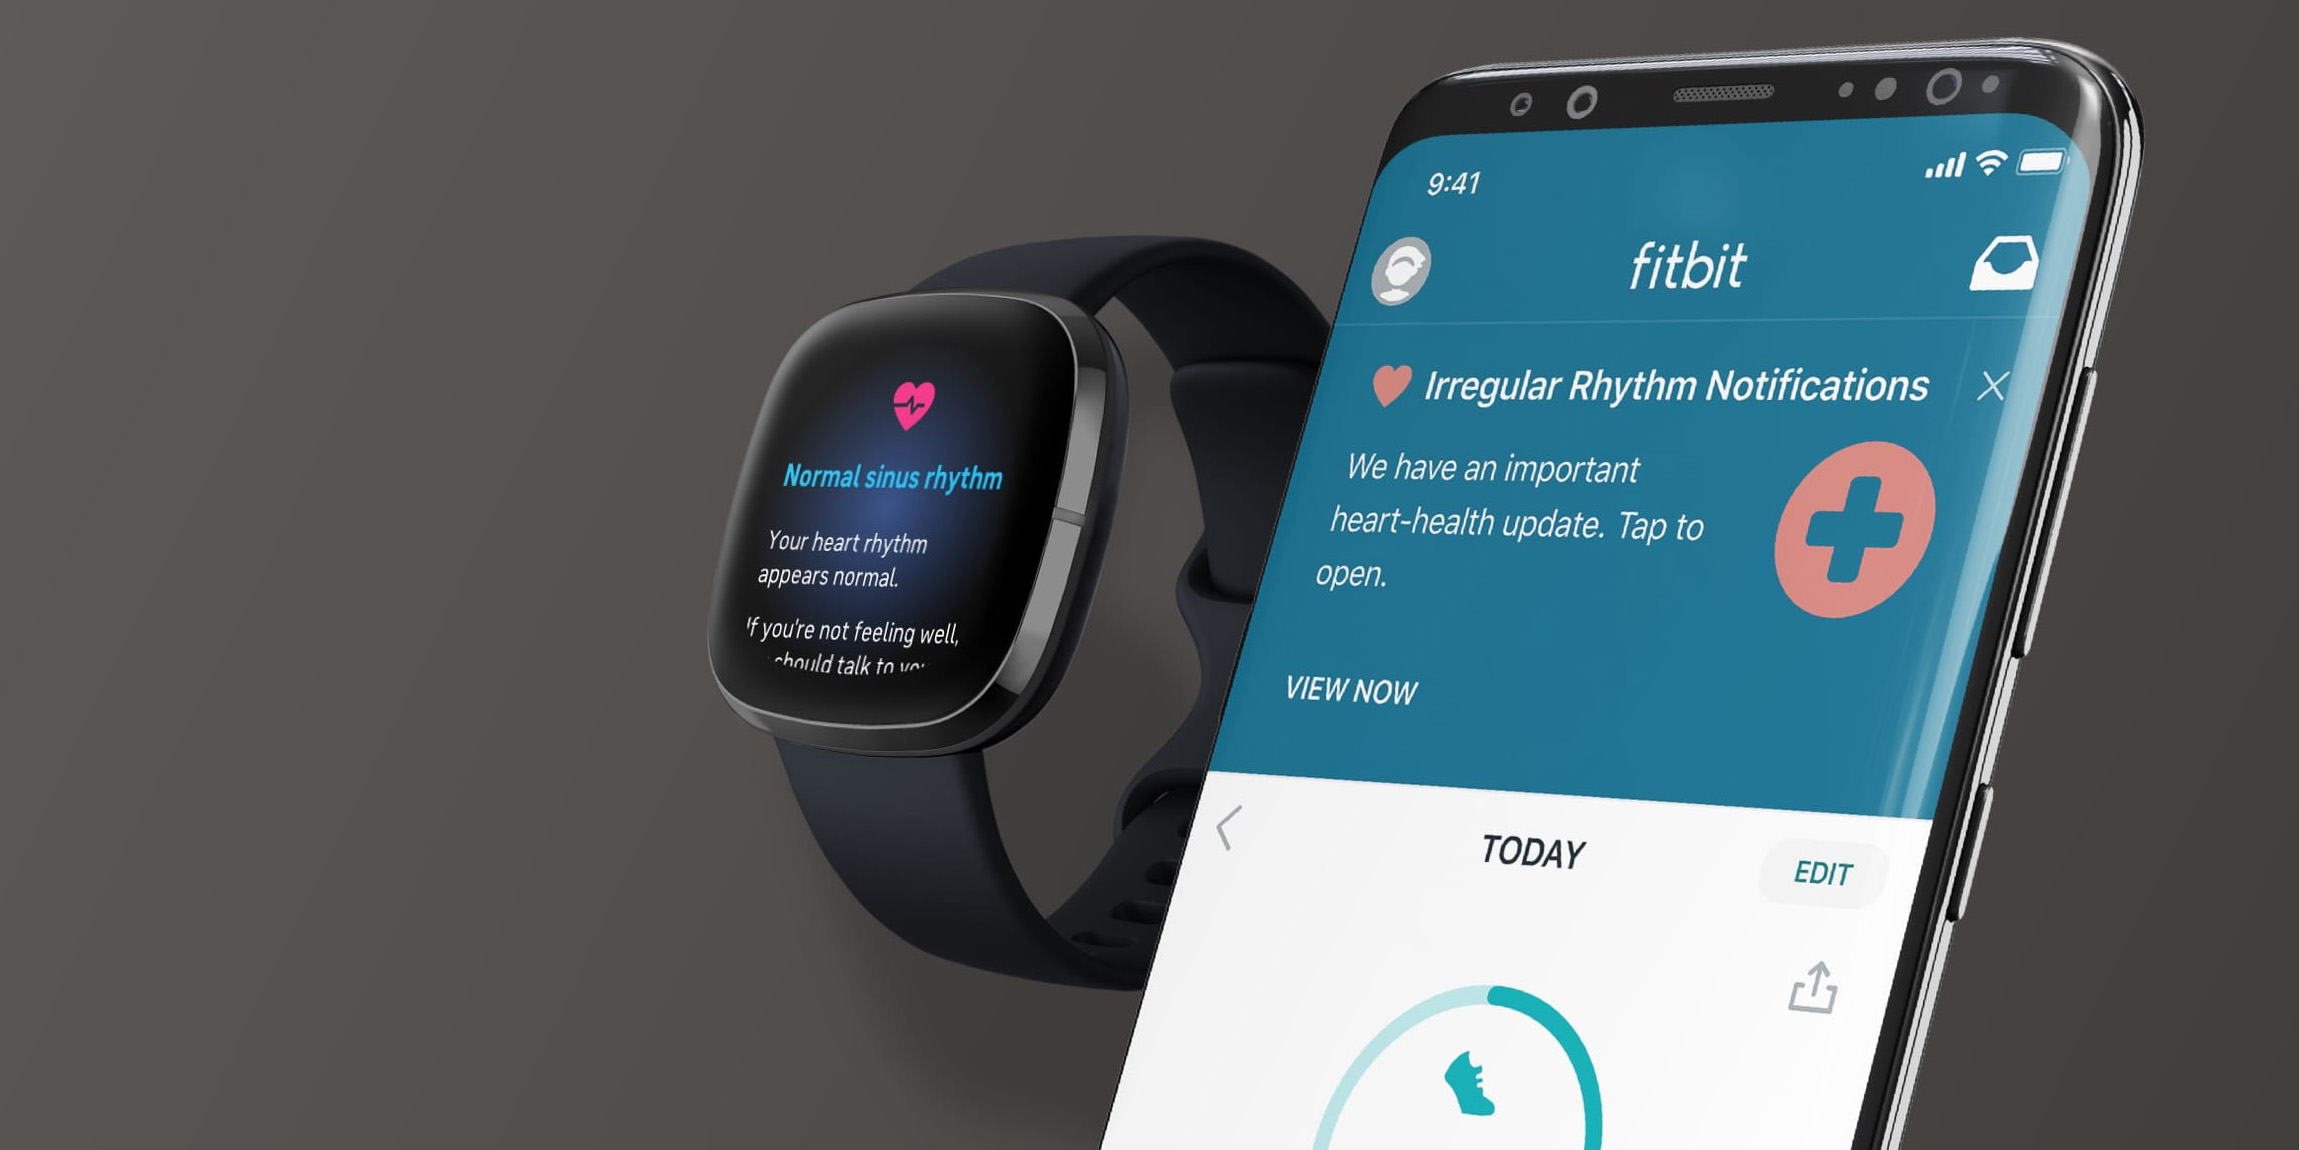 Fitbit Irregular Heart Rhythm Notifications are US only